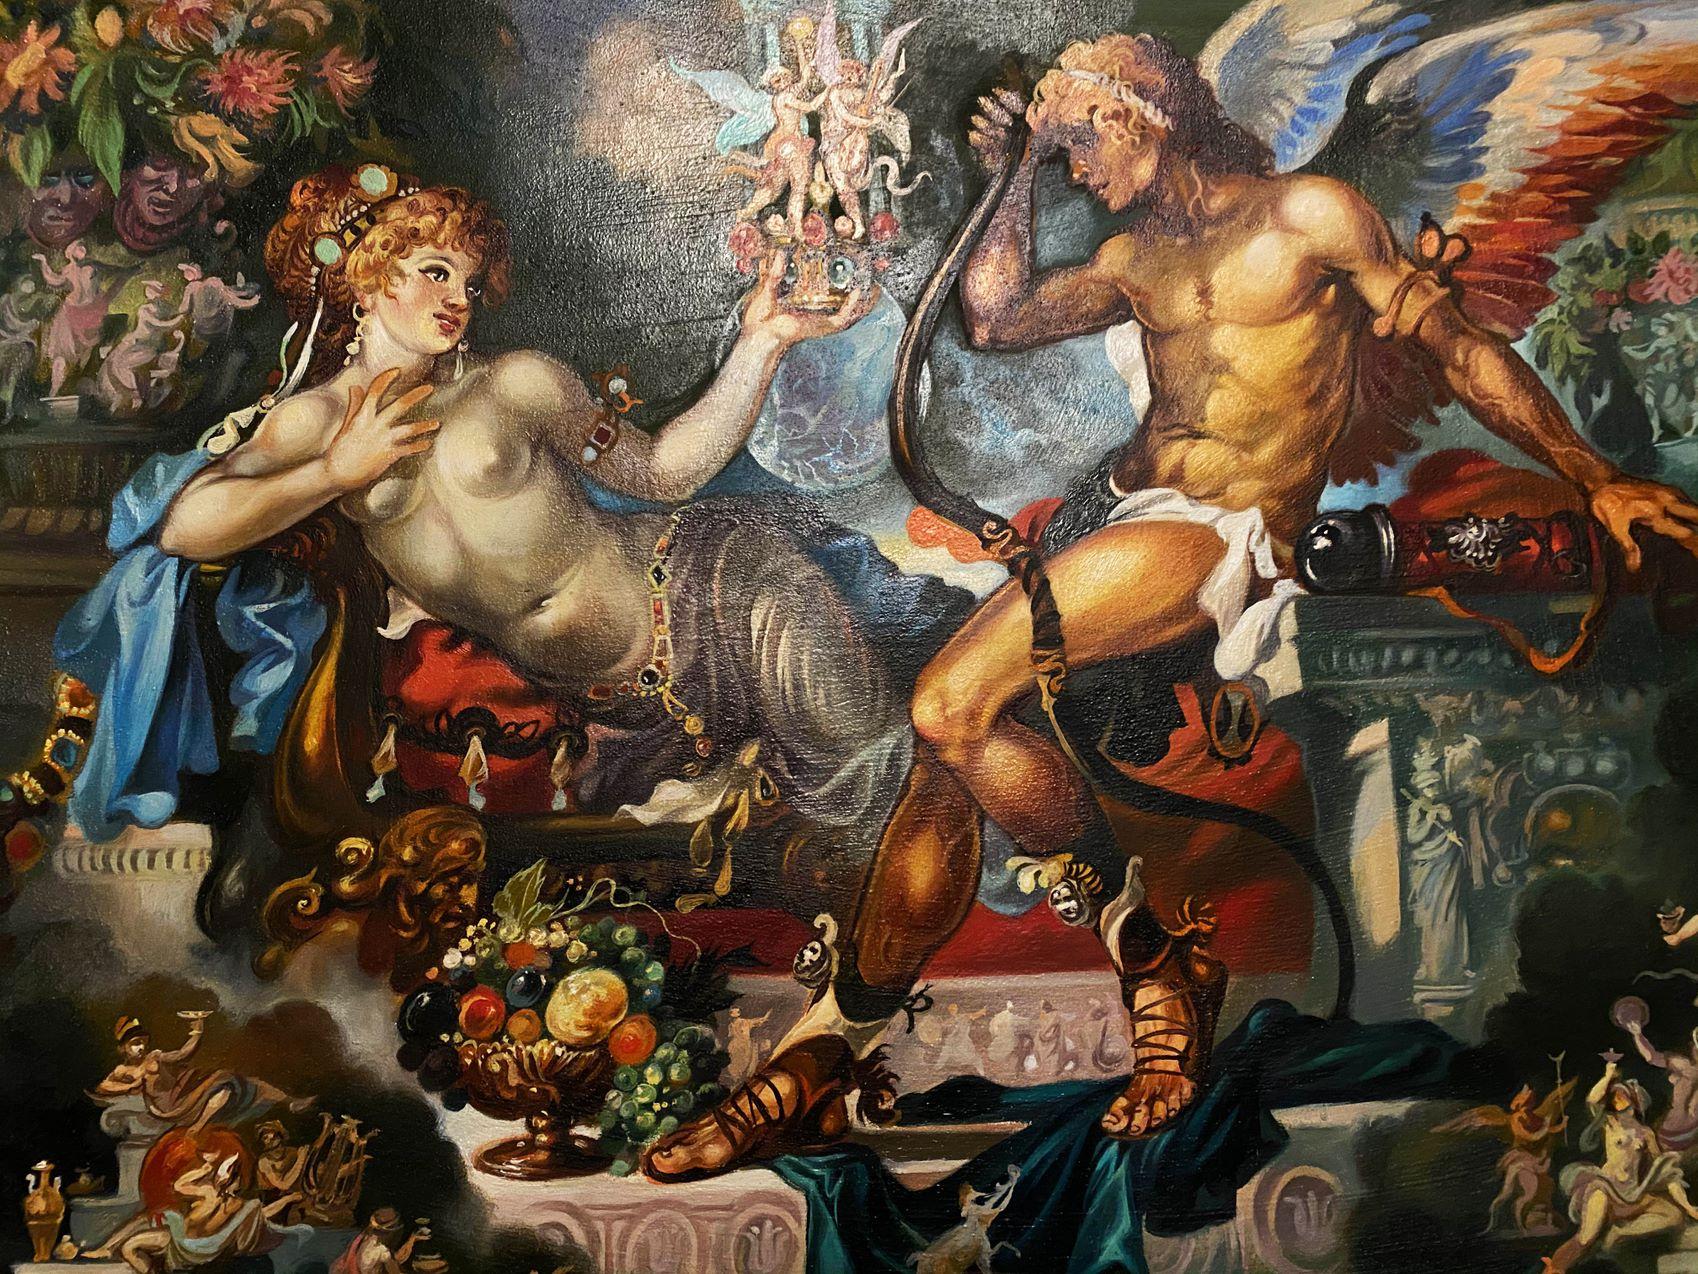 Artist: Alexander Litvinov
Work: Original oil painting, handmade artwork, one of a kind 
Medium: Oil on Canvas
Style: Classic Figurative
Year: 2003
Title: Cupid and Psyche
Size: 20